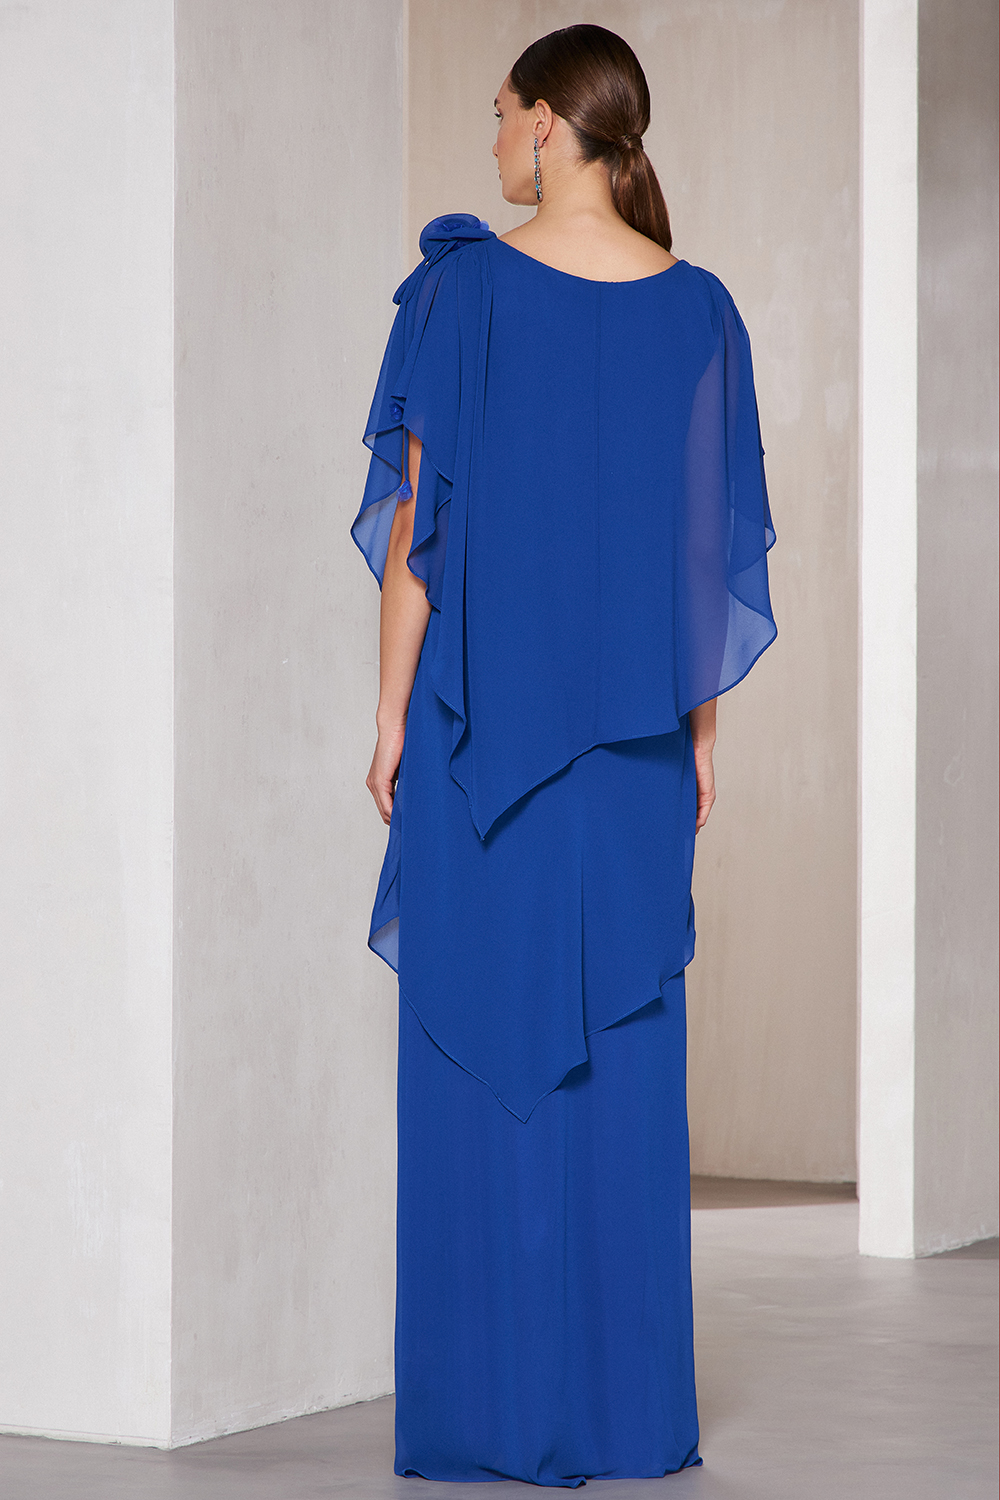 Classic Dresses / Long evening dress with chiffon for the mother of the bride